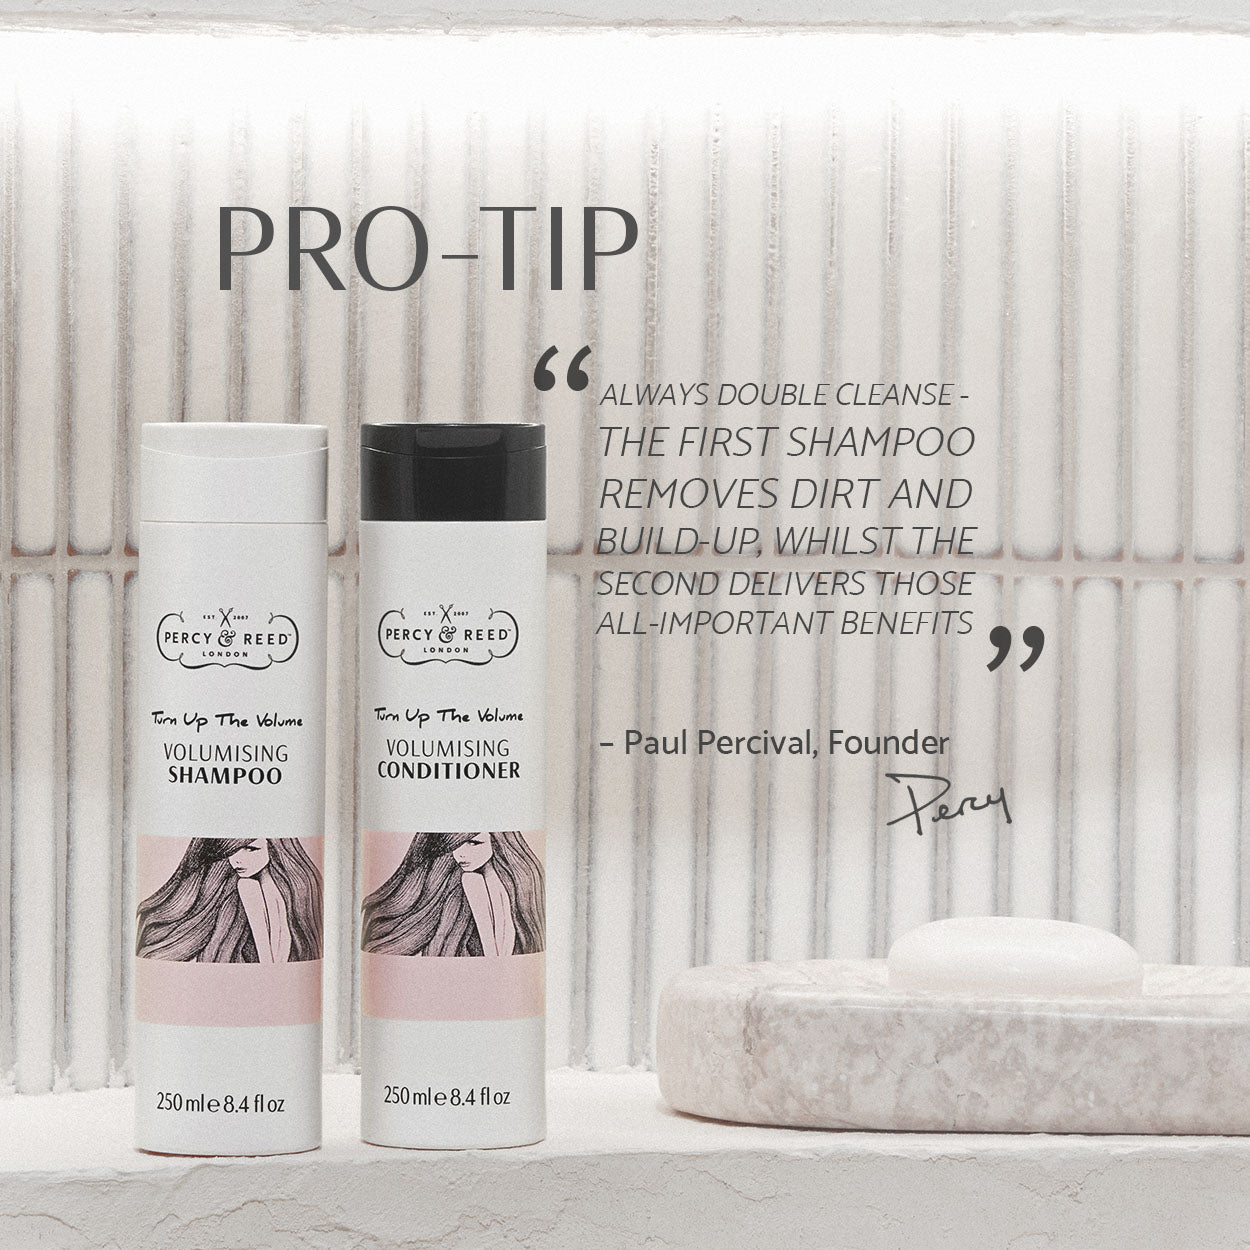 Percy & Reed Turn Up The Volume Volumising Shampoo and Conditioner Bundle